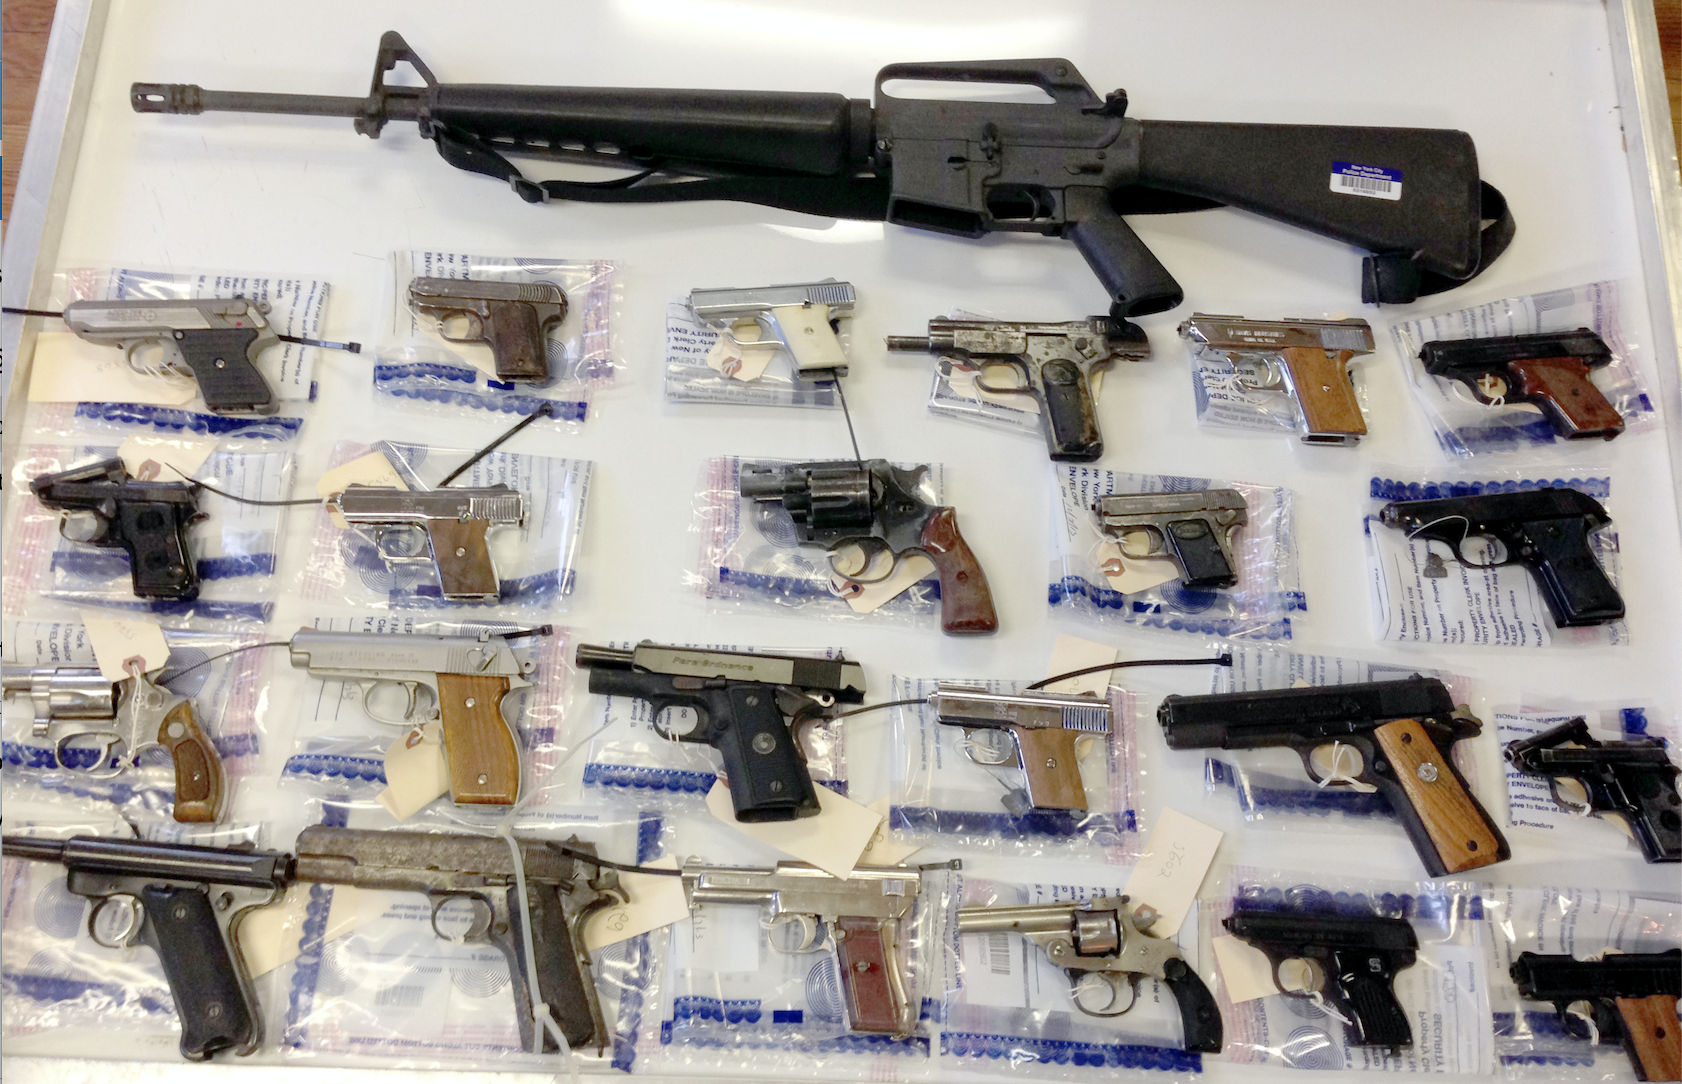 Gun Buy Back Recovers an Illegal Arsenal of Weapons - Harlem - New York -  DNAinfo